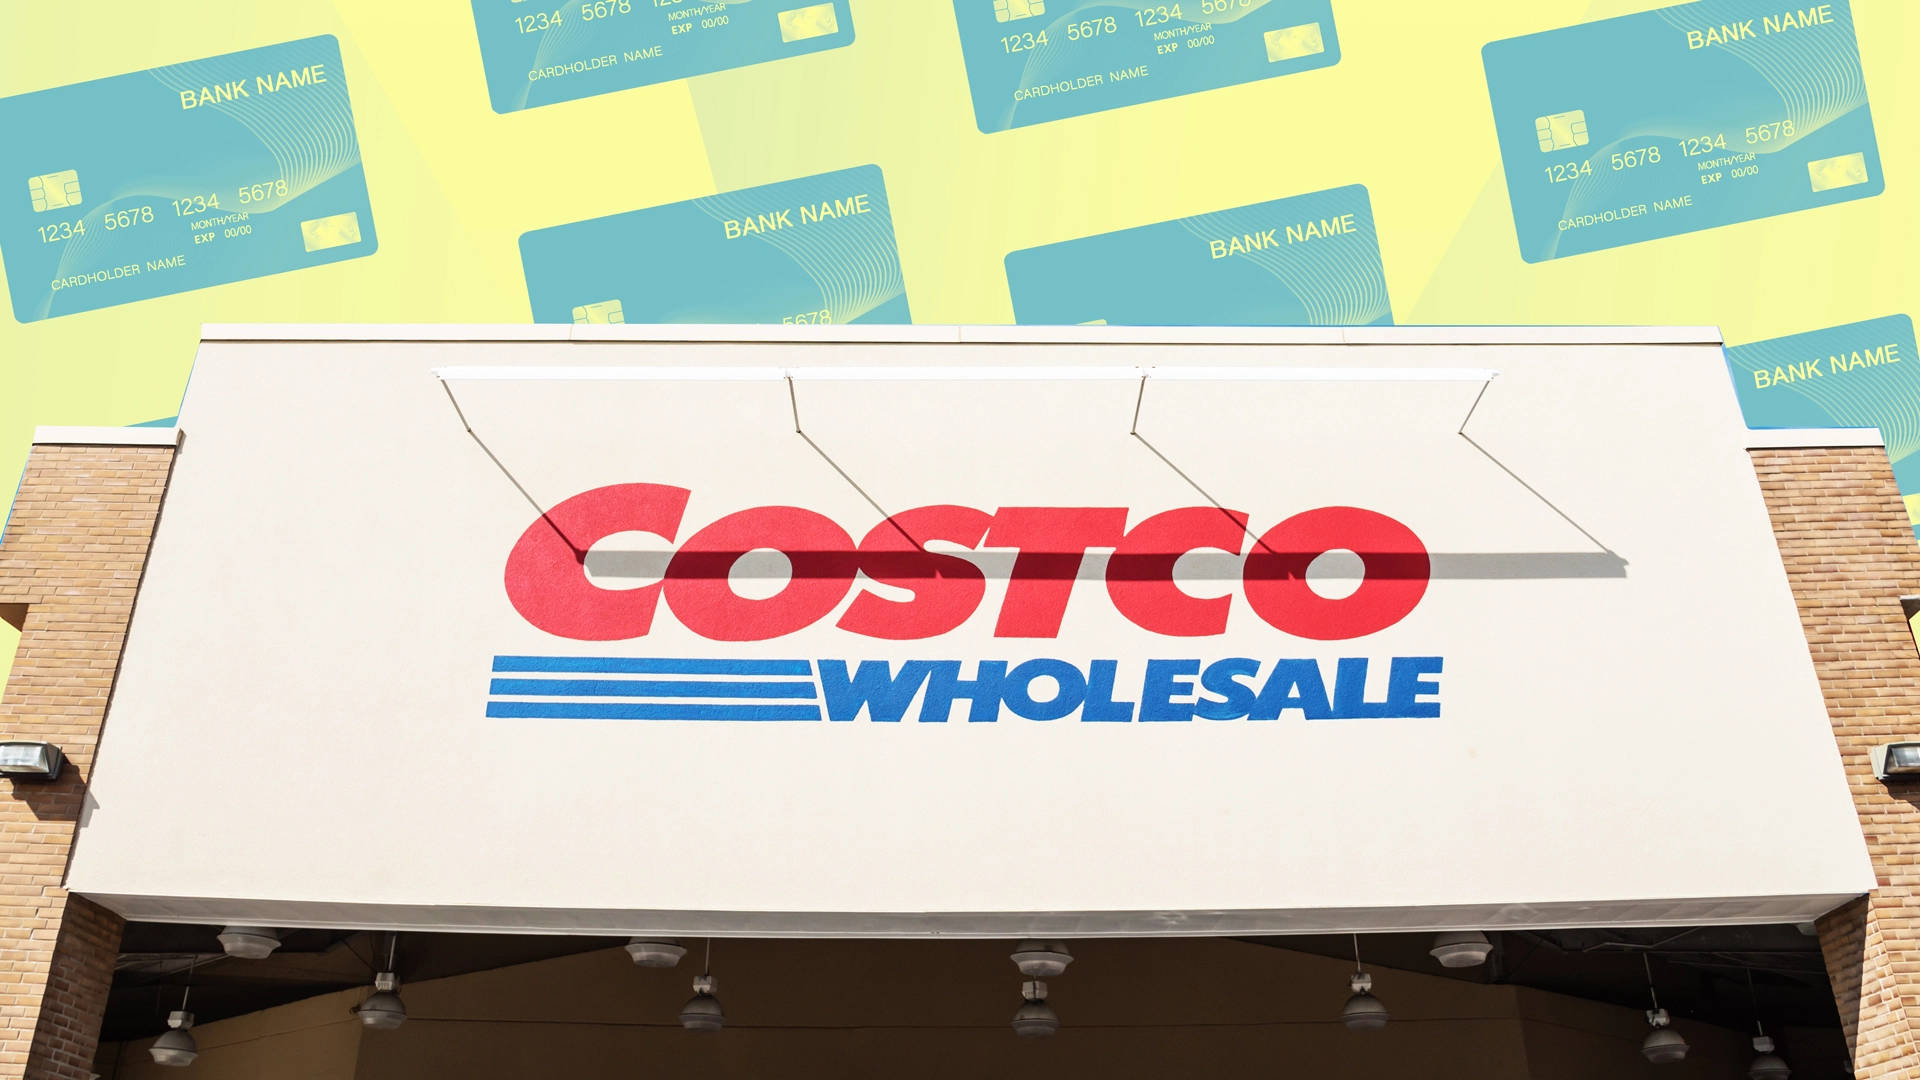 Costco Storefront Signage Displaying Credit Card Acceptance Wallpaper